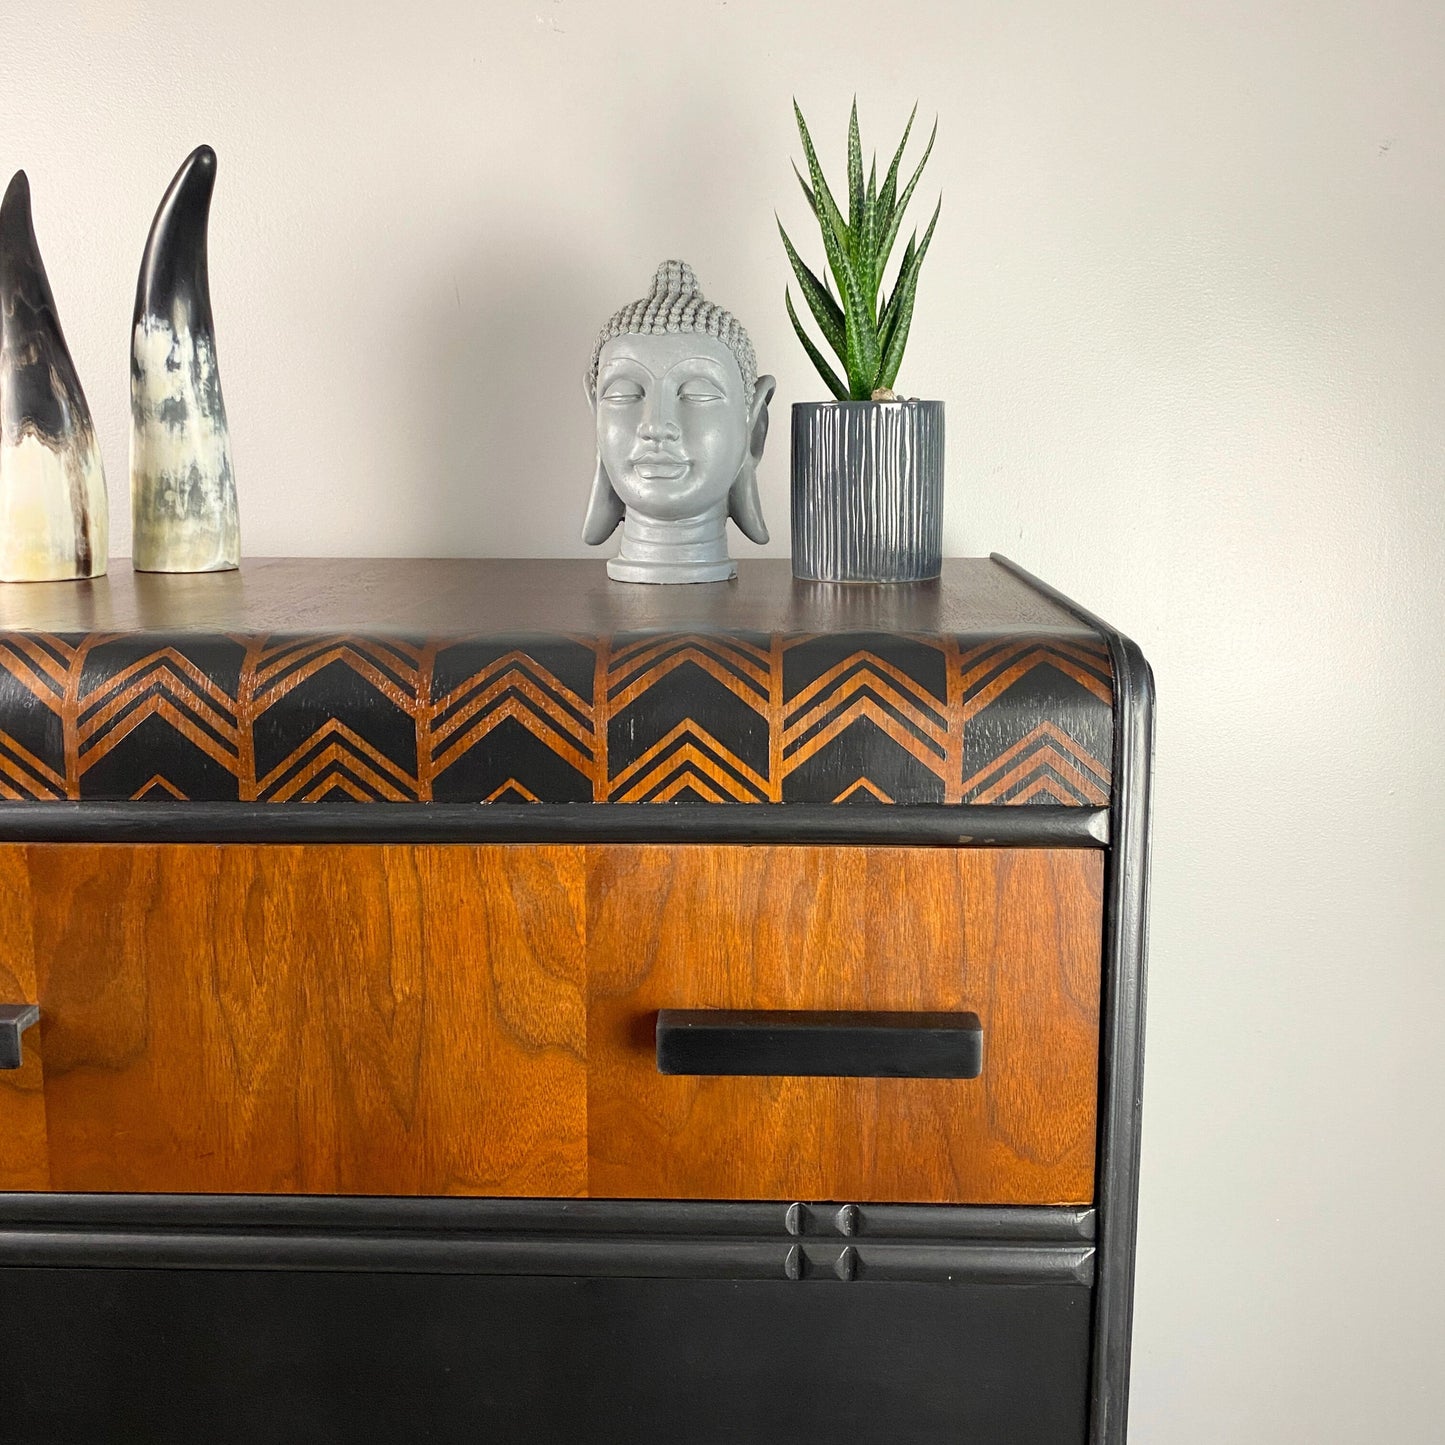 Vintage Waterfall Dresser in Black and Walnut and Chevron Details